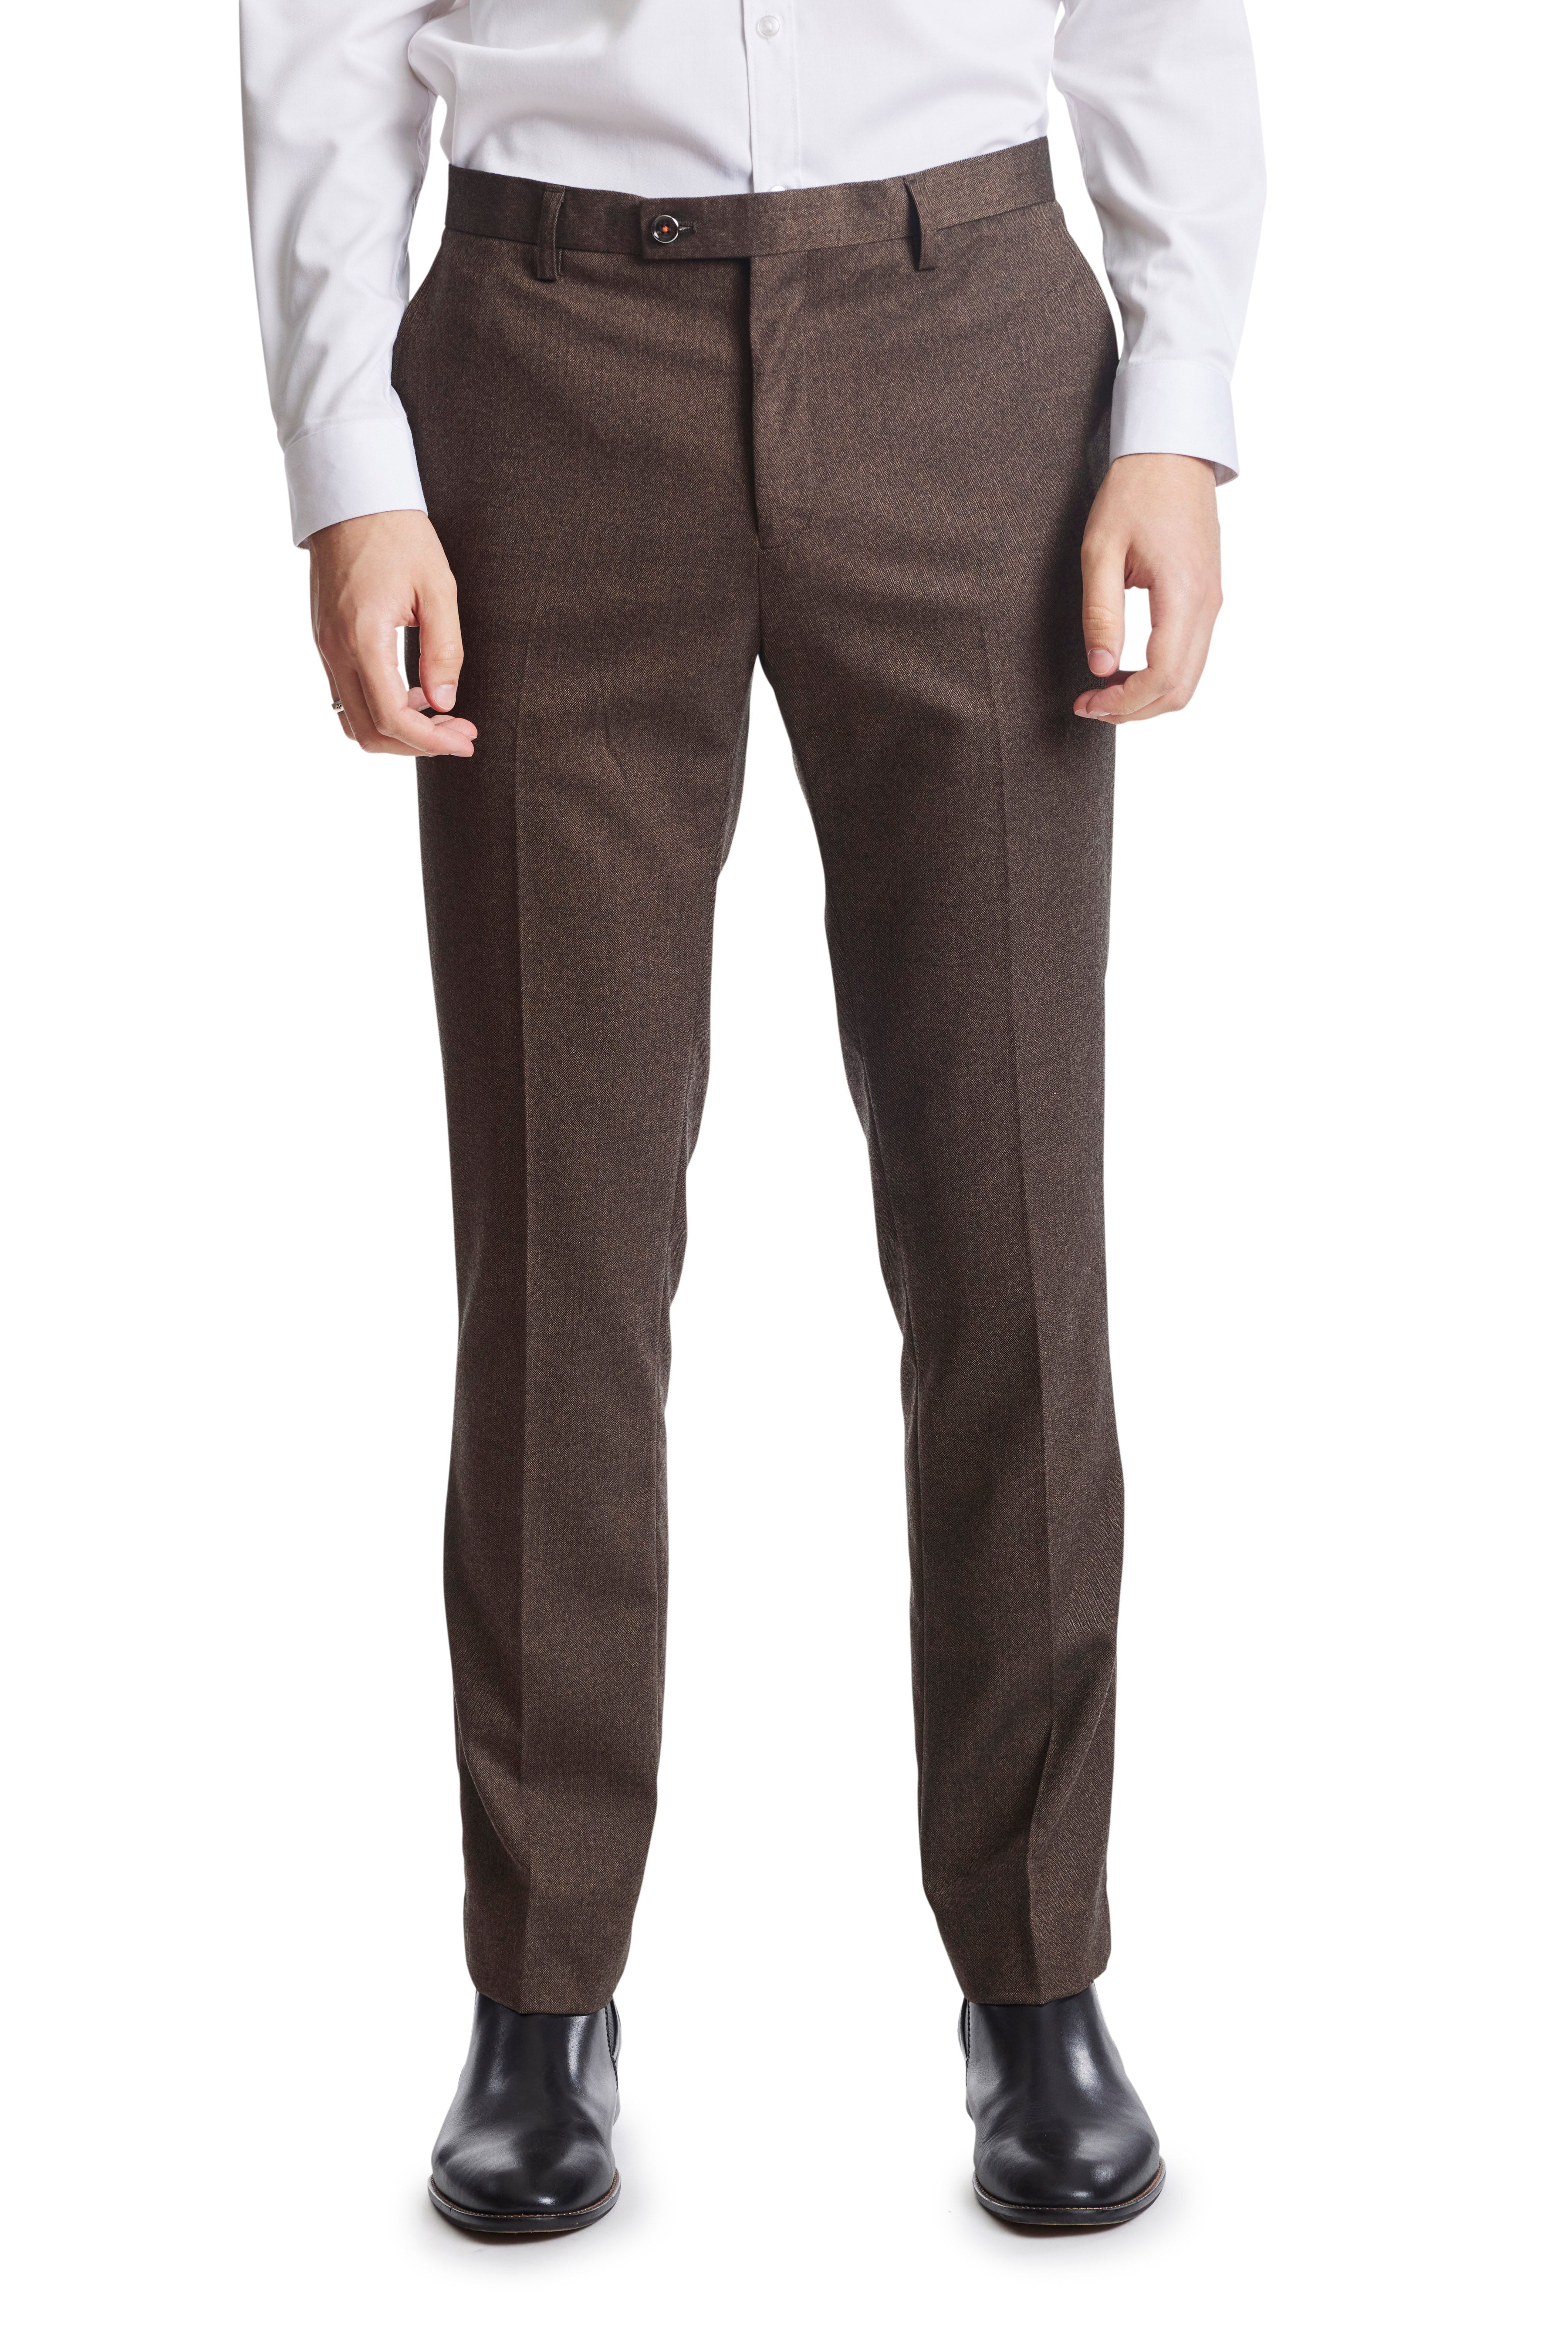 New Look relaxed suit pants in brown | ASOS